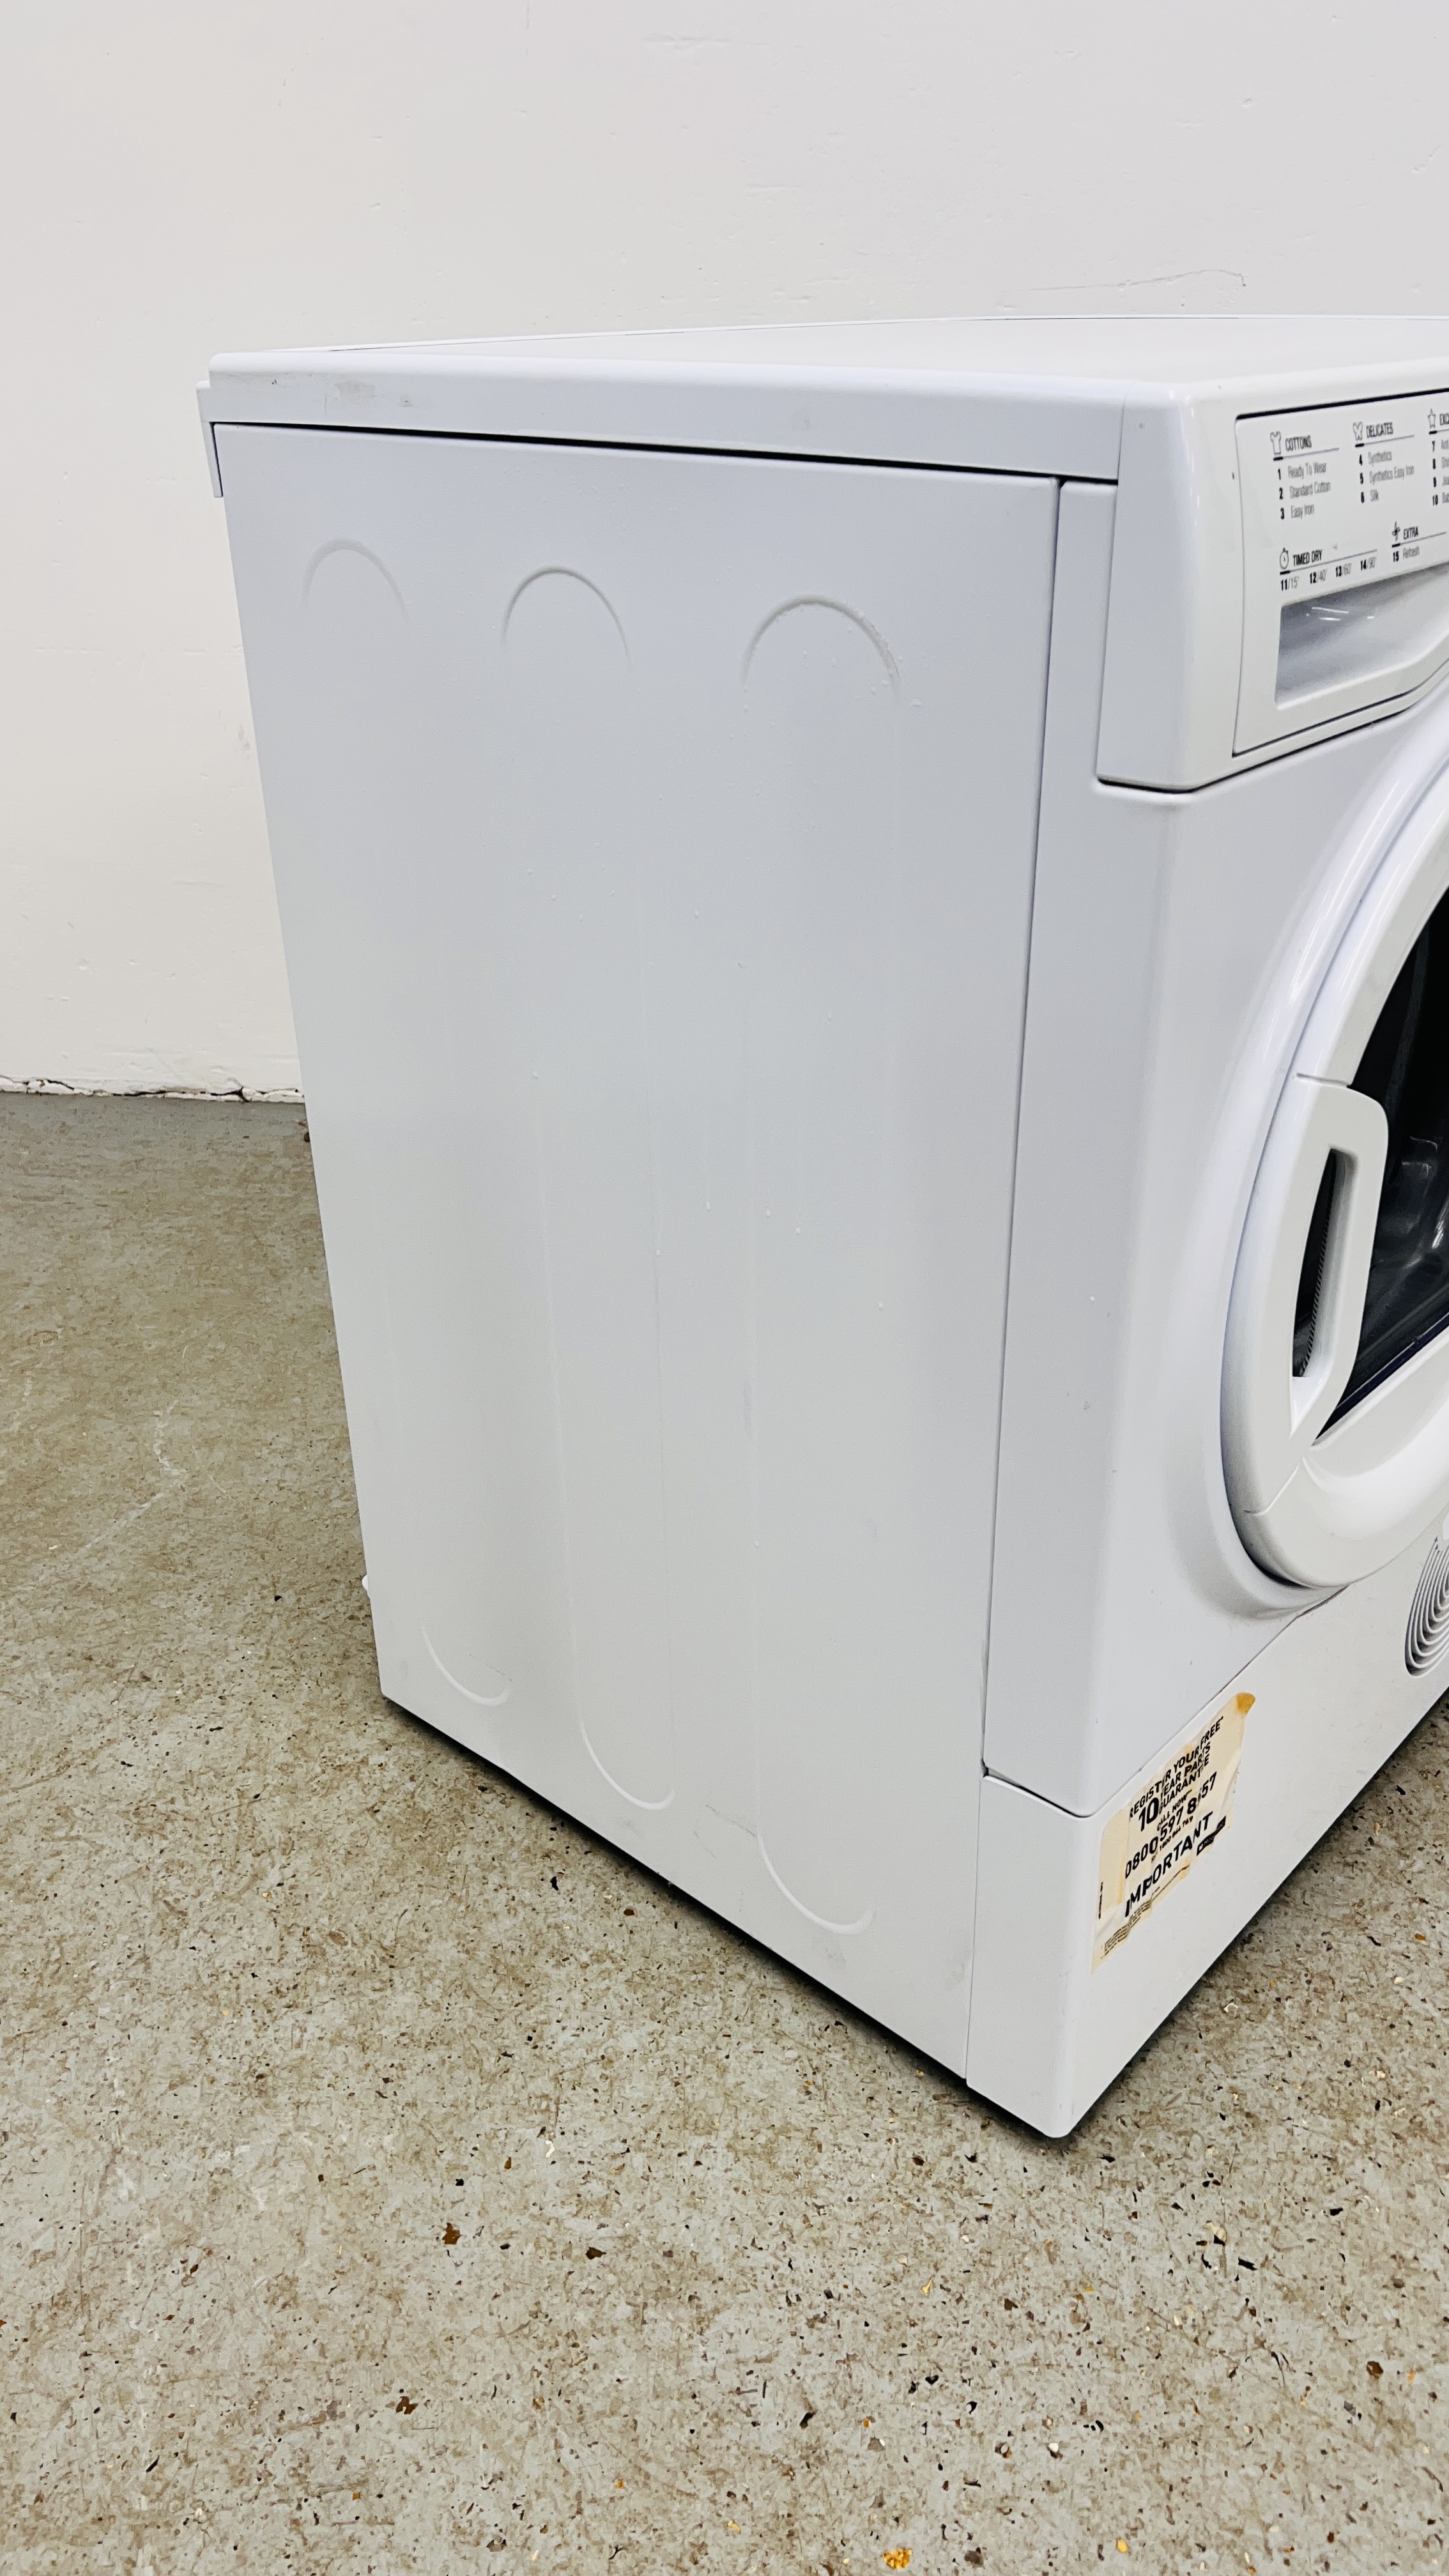 A HOTPOINT 8KG AQUARIUS CONDENSER TUMBLE DRYER - SOLD AS SEEN. - Image 7 of 7